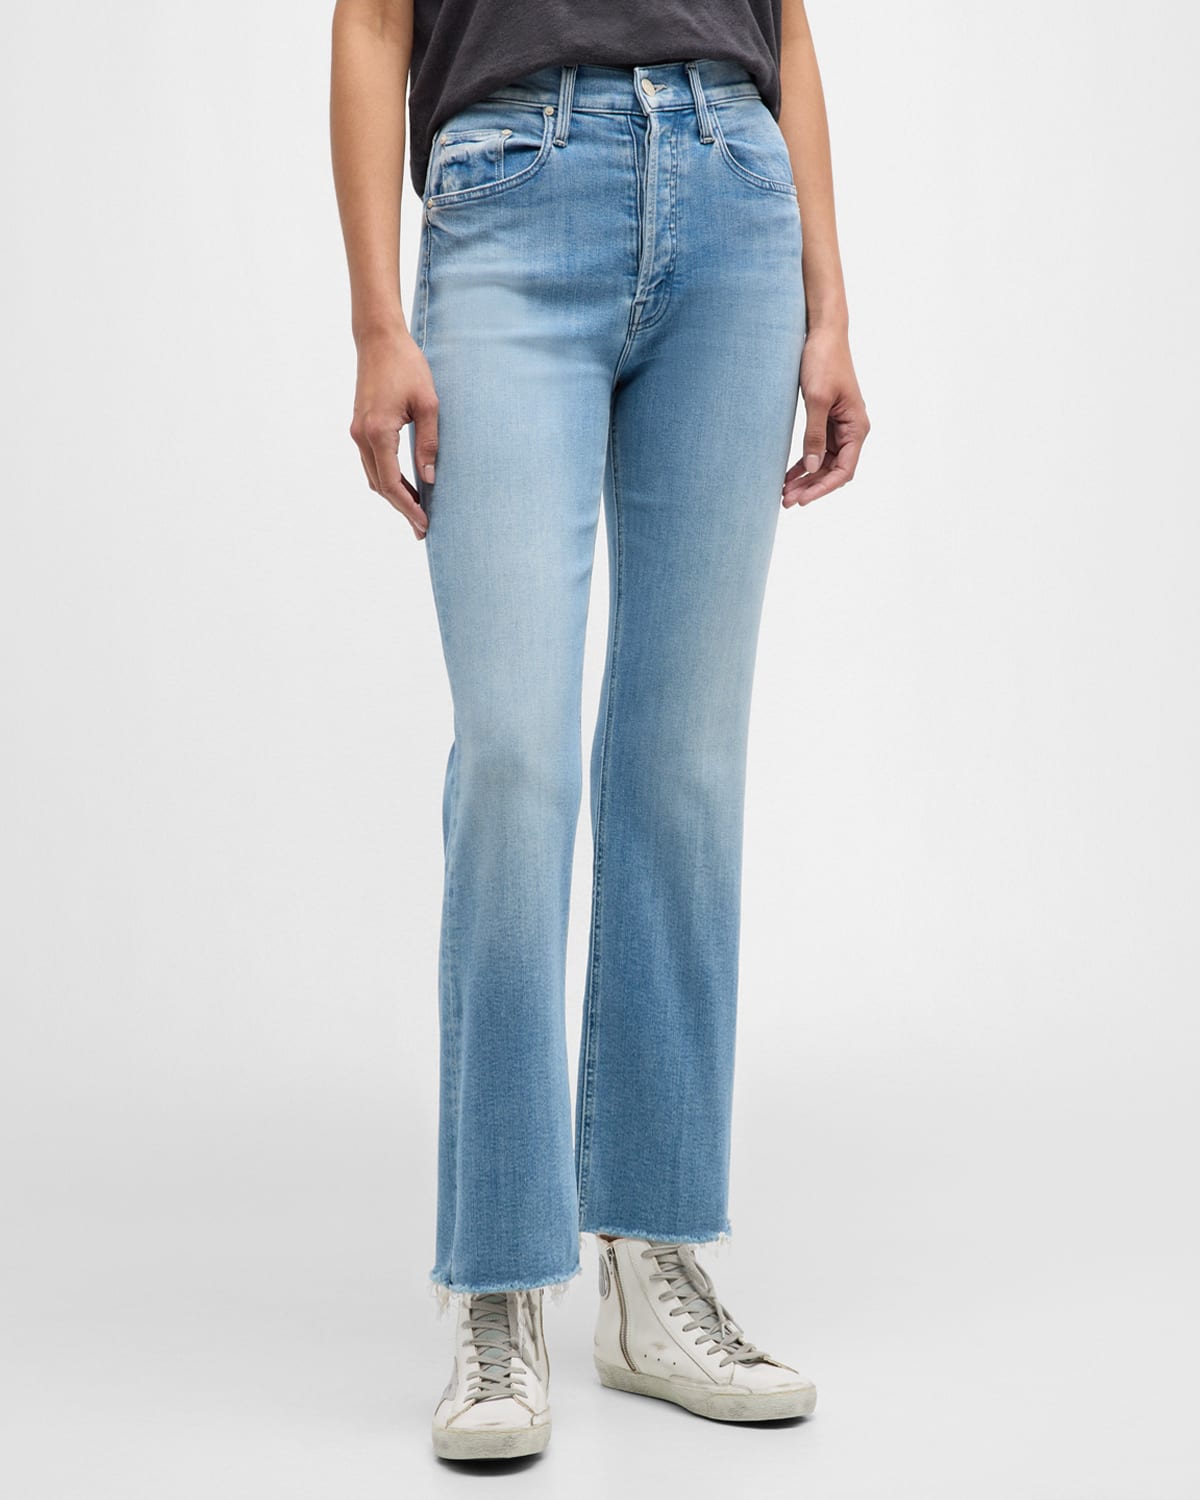 The Tripped Ankle Fray Straight Leg Jeans